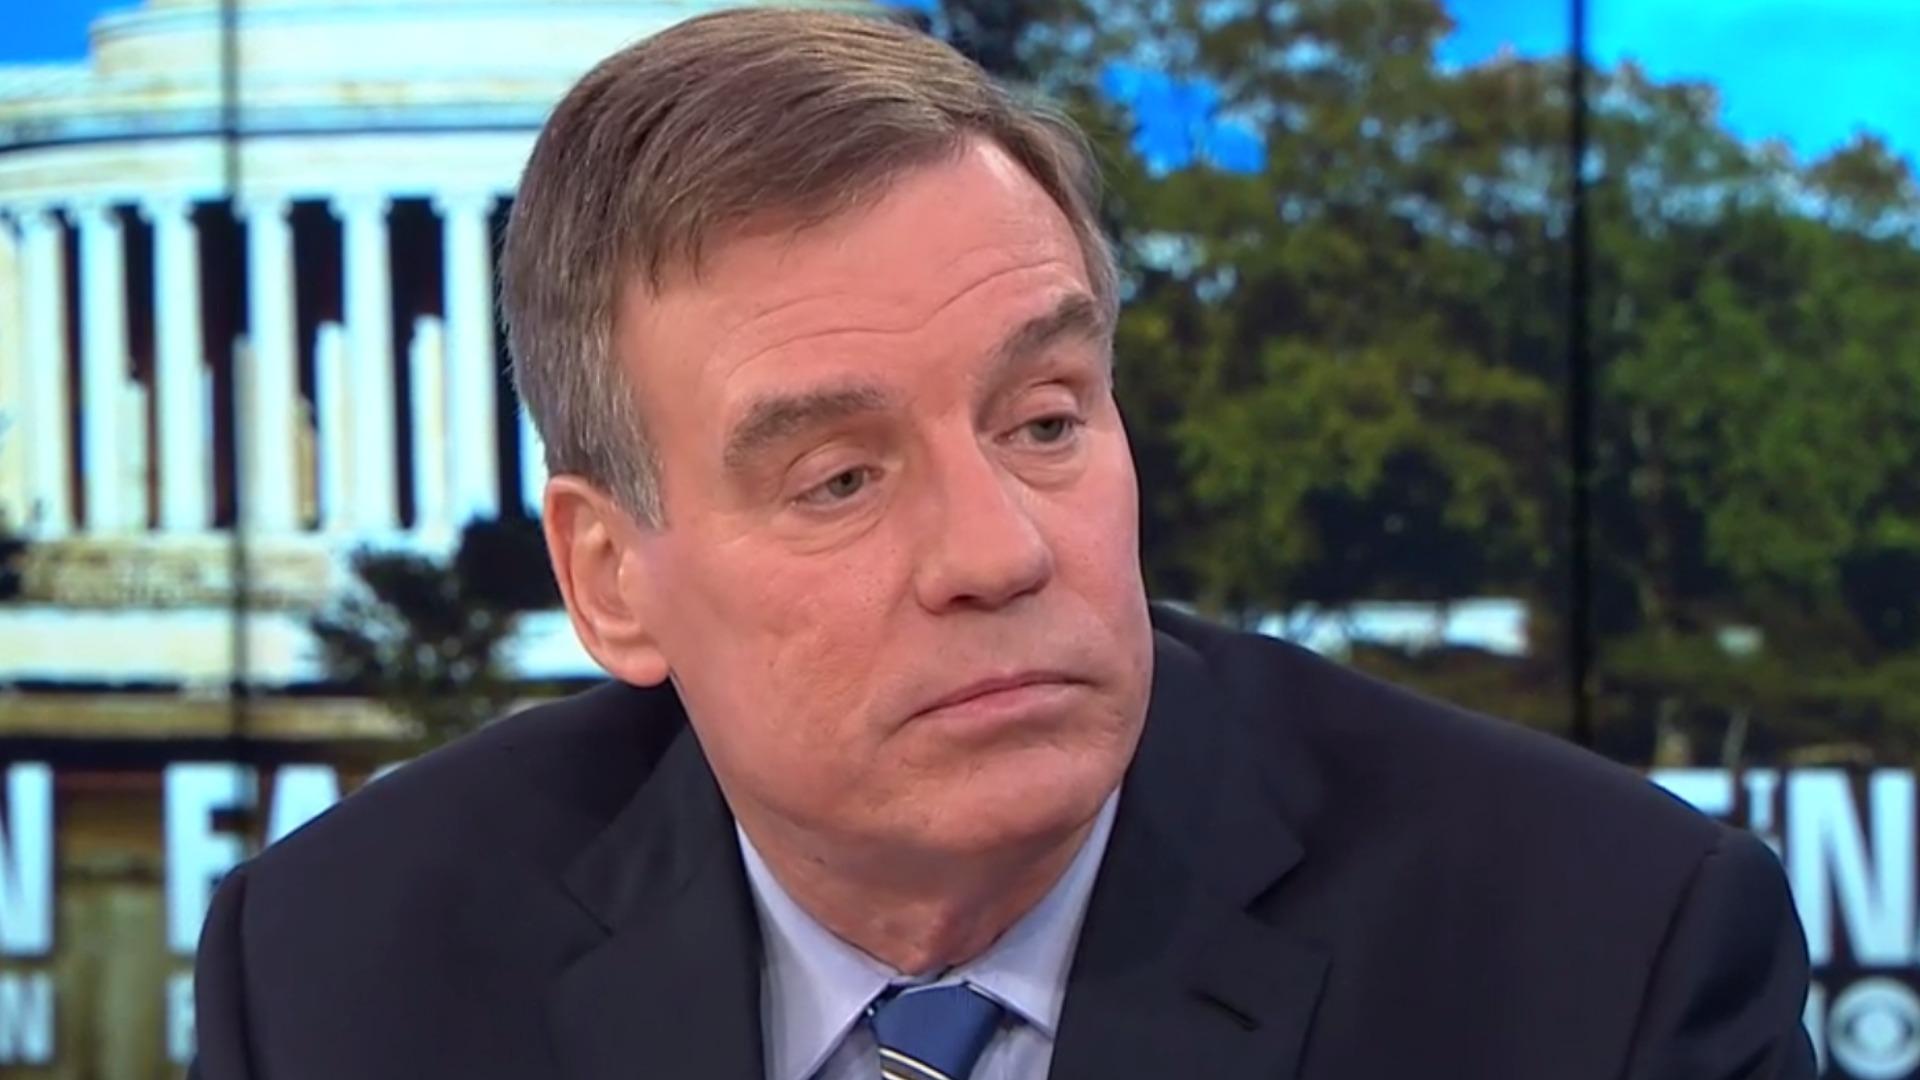 Mark Warner urges reunification after visit Youth of Tomorrow facility ...